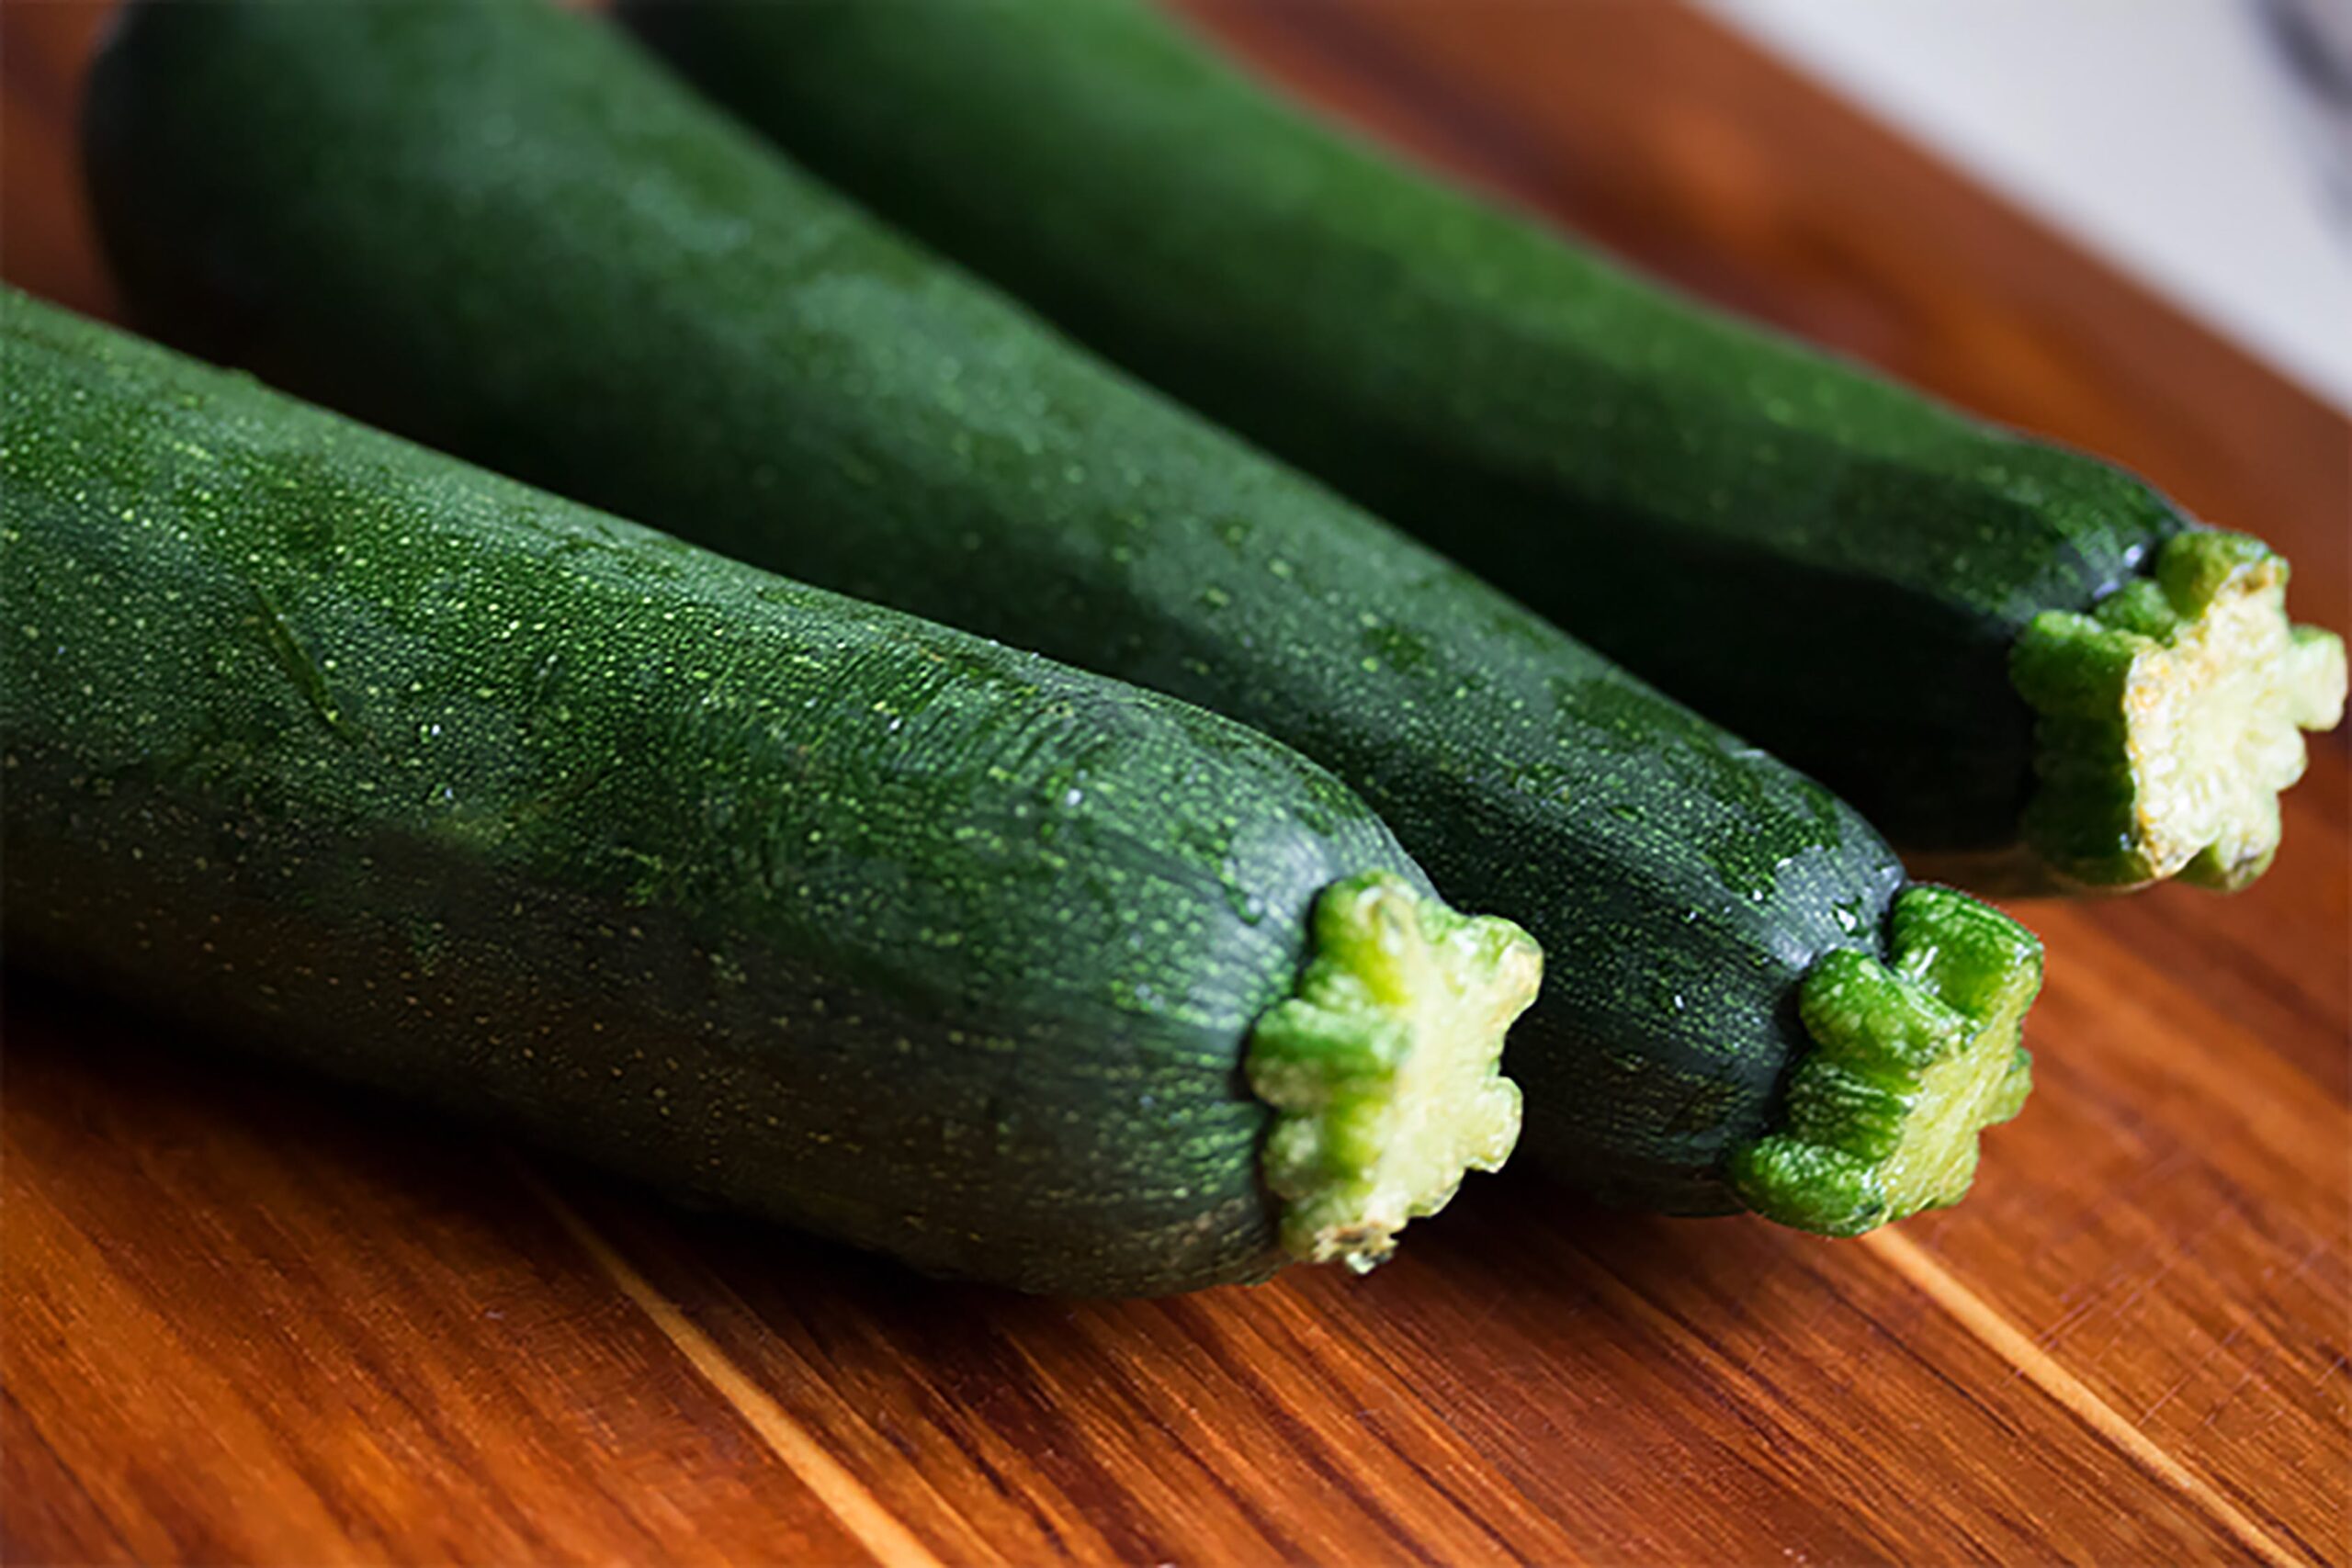 Benefits of cucumber juice on empty stomach